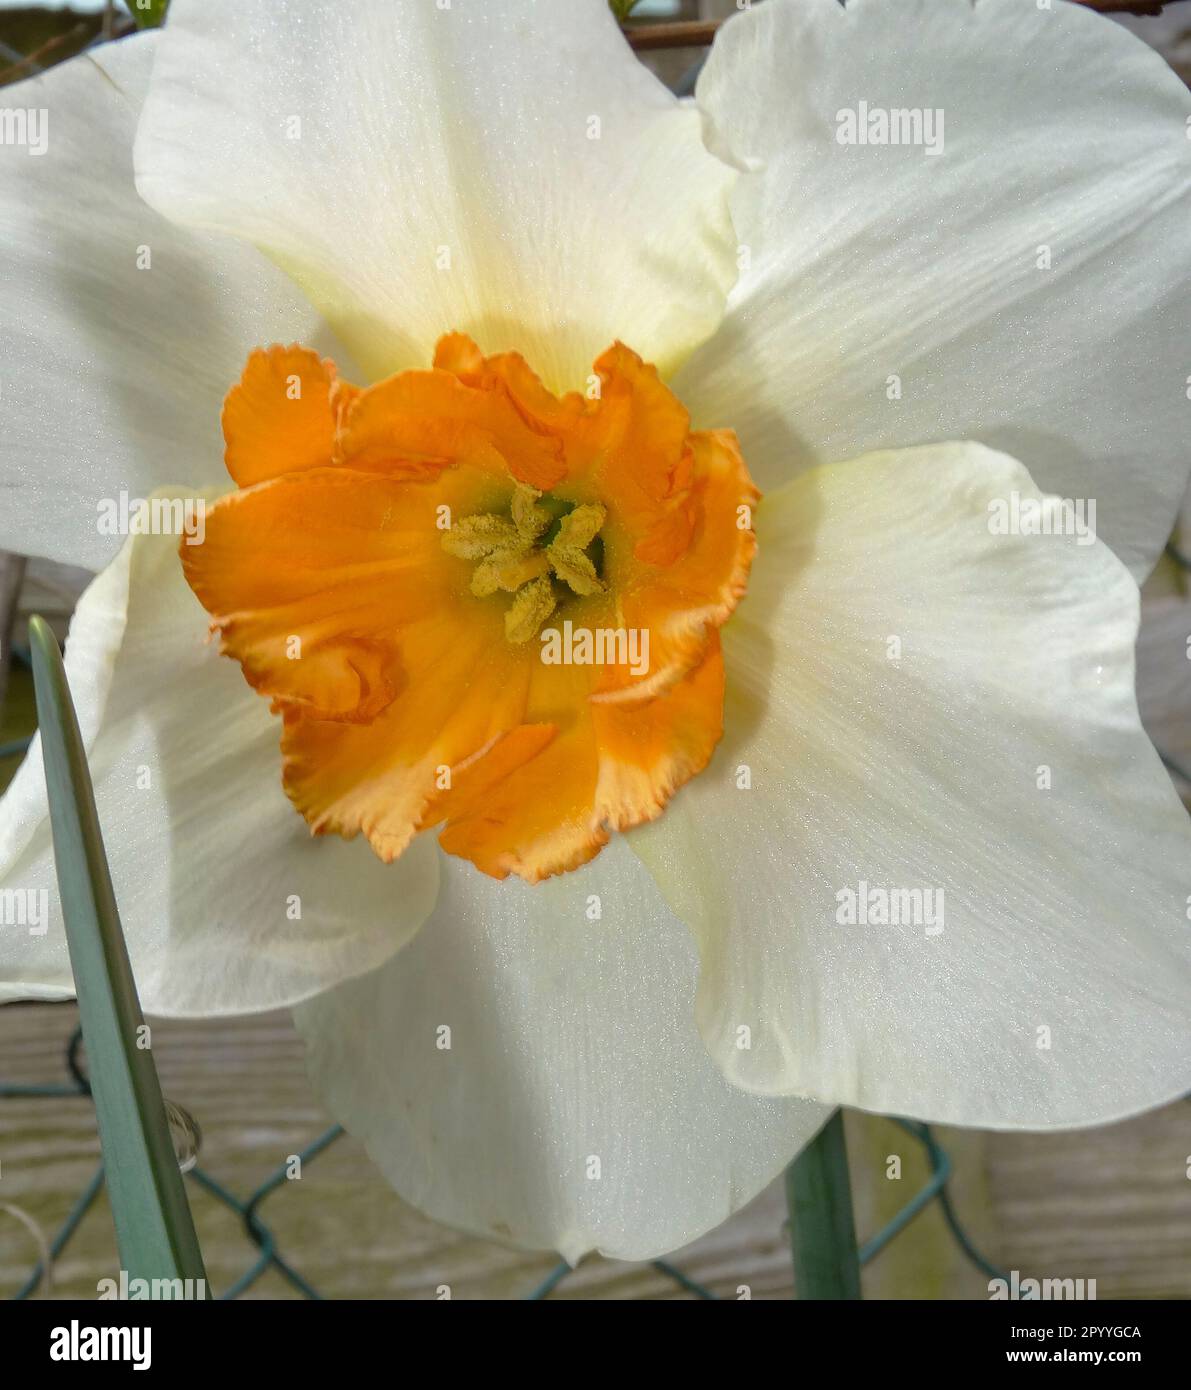 Intimate landscape, natural flowering plant portrait,  of Daffodils glowing in spring sunshine Stock Photo